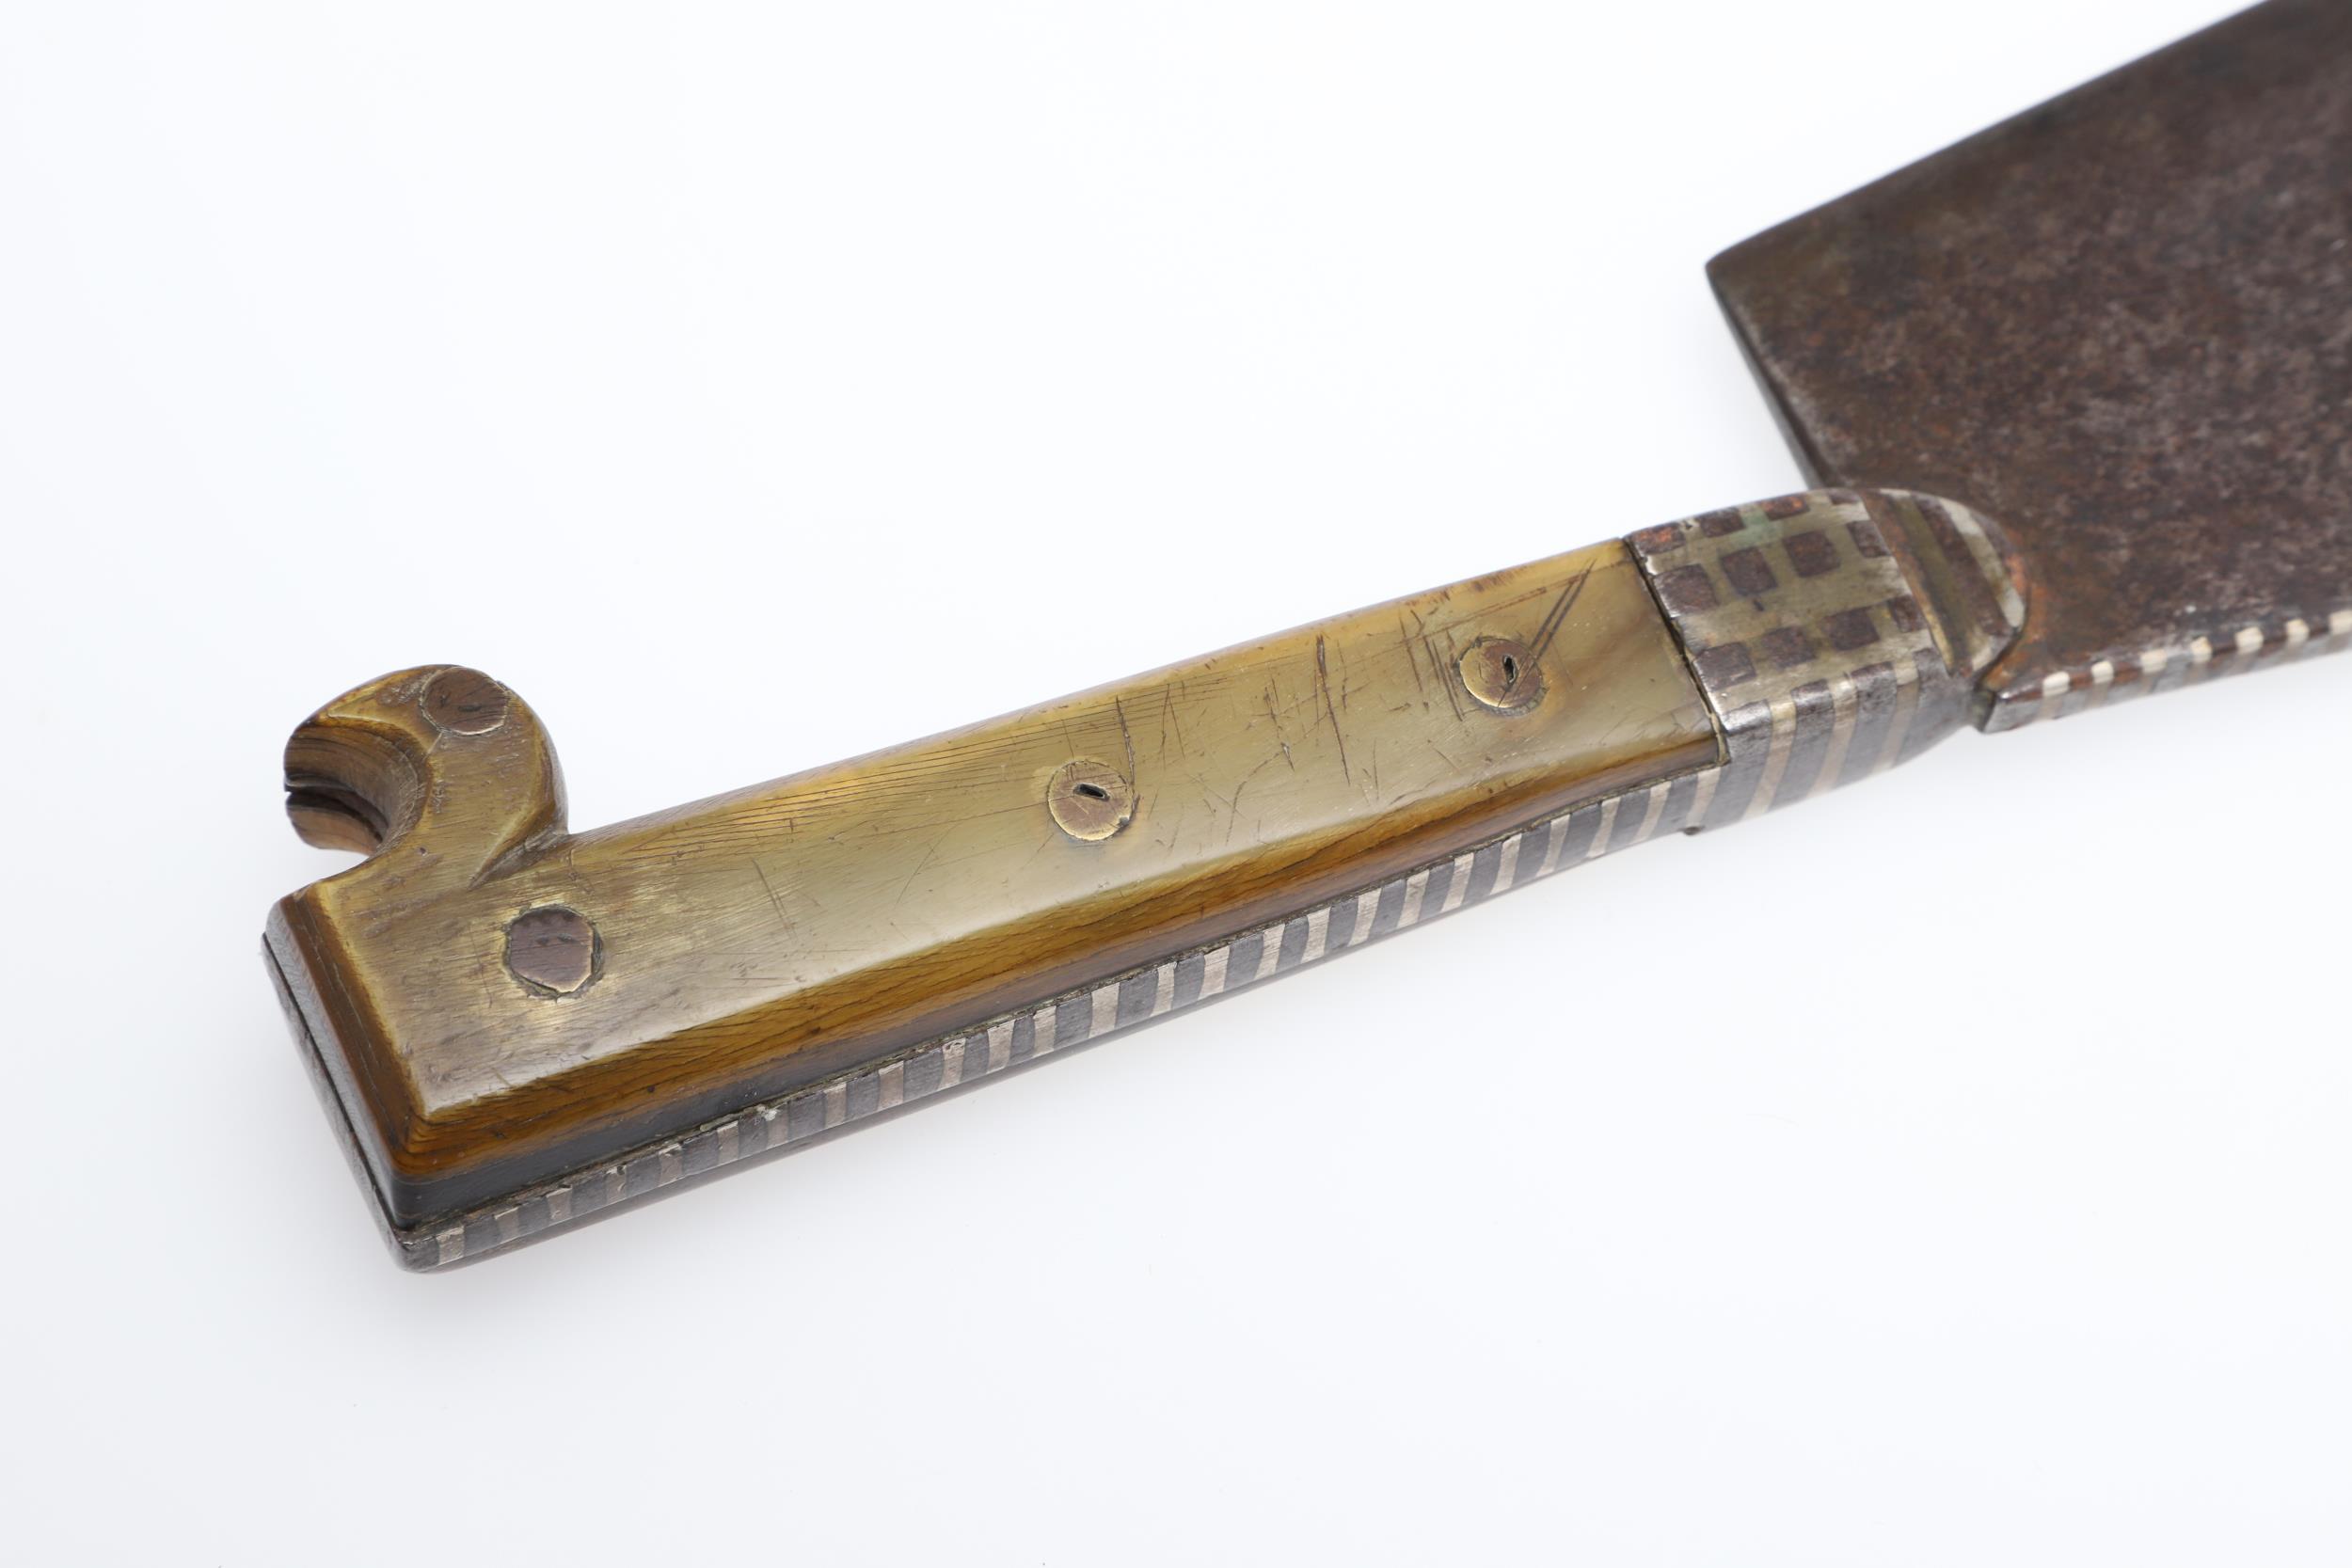 AN UNUSUAL 19TH CENTURY INDIAN HAND AXE OR KNIFE. - Image 6 of 8